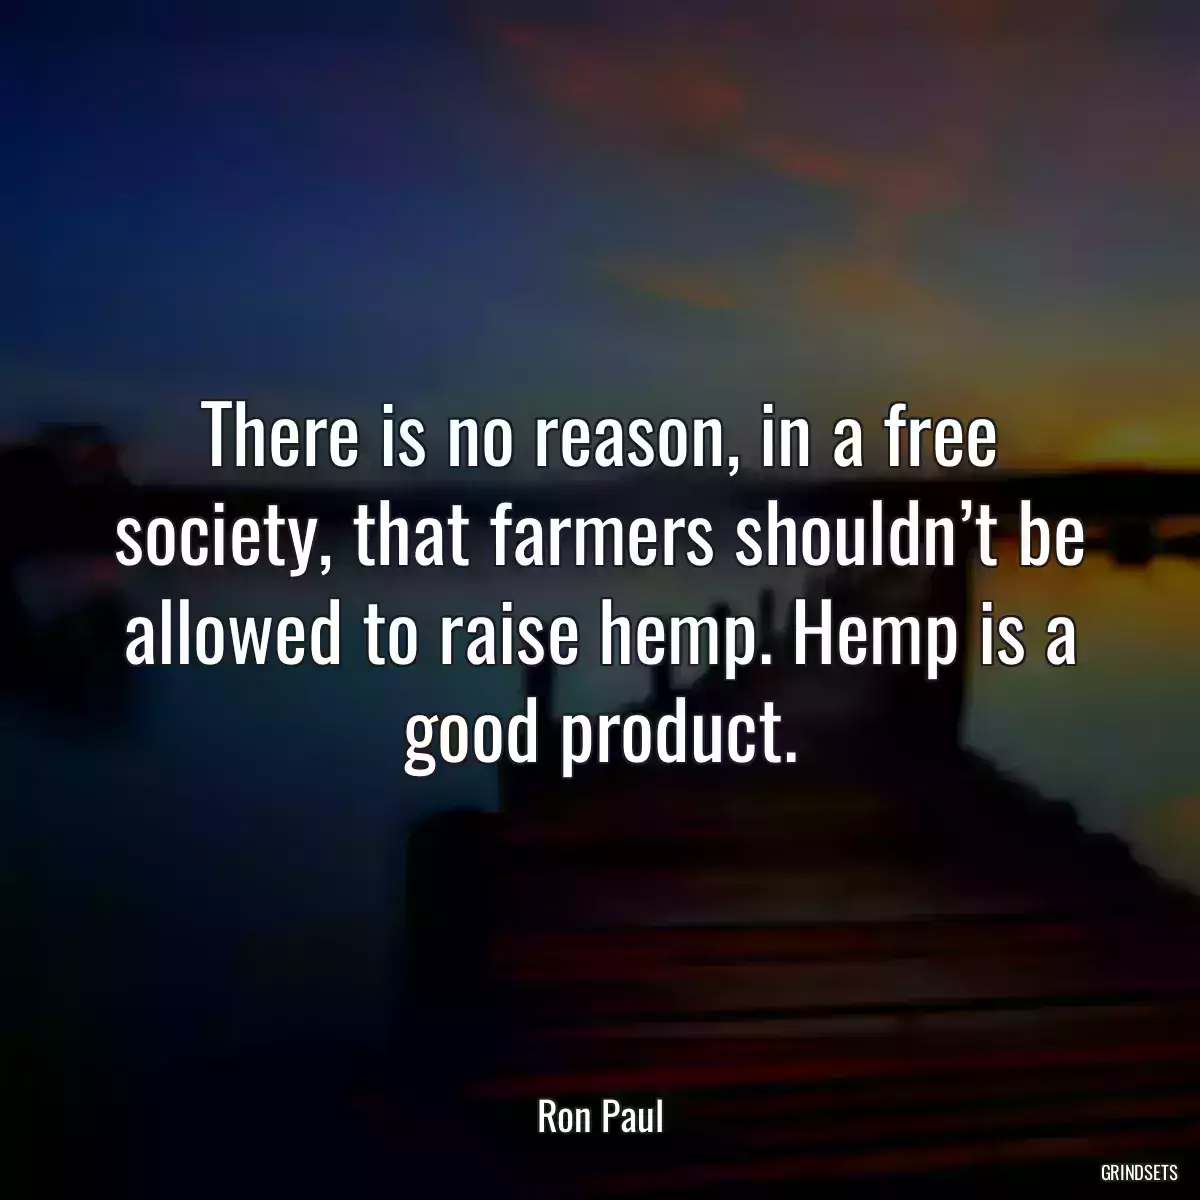 There is no reason, in a free society, that farmers shouldn’t be allowed to raise hemp. Hemp is a good product.